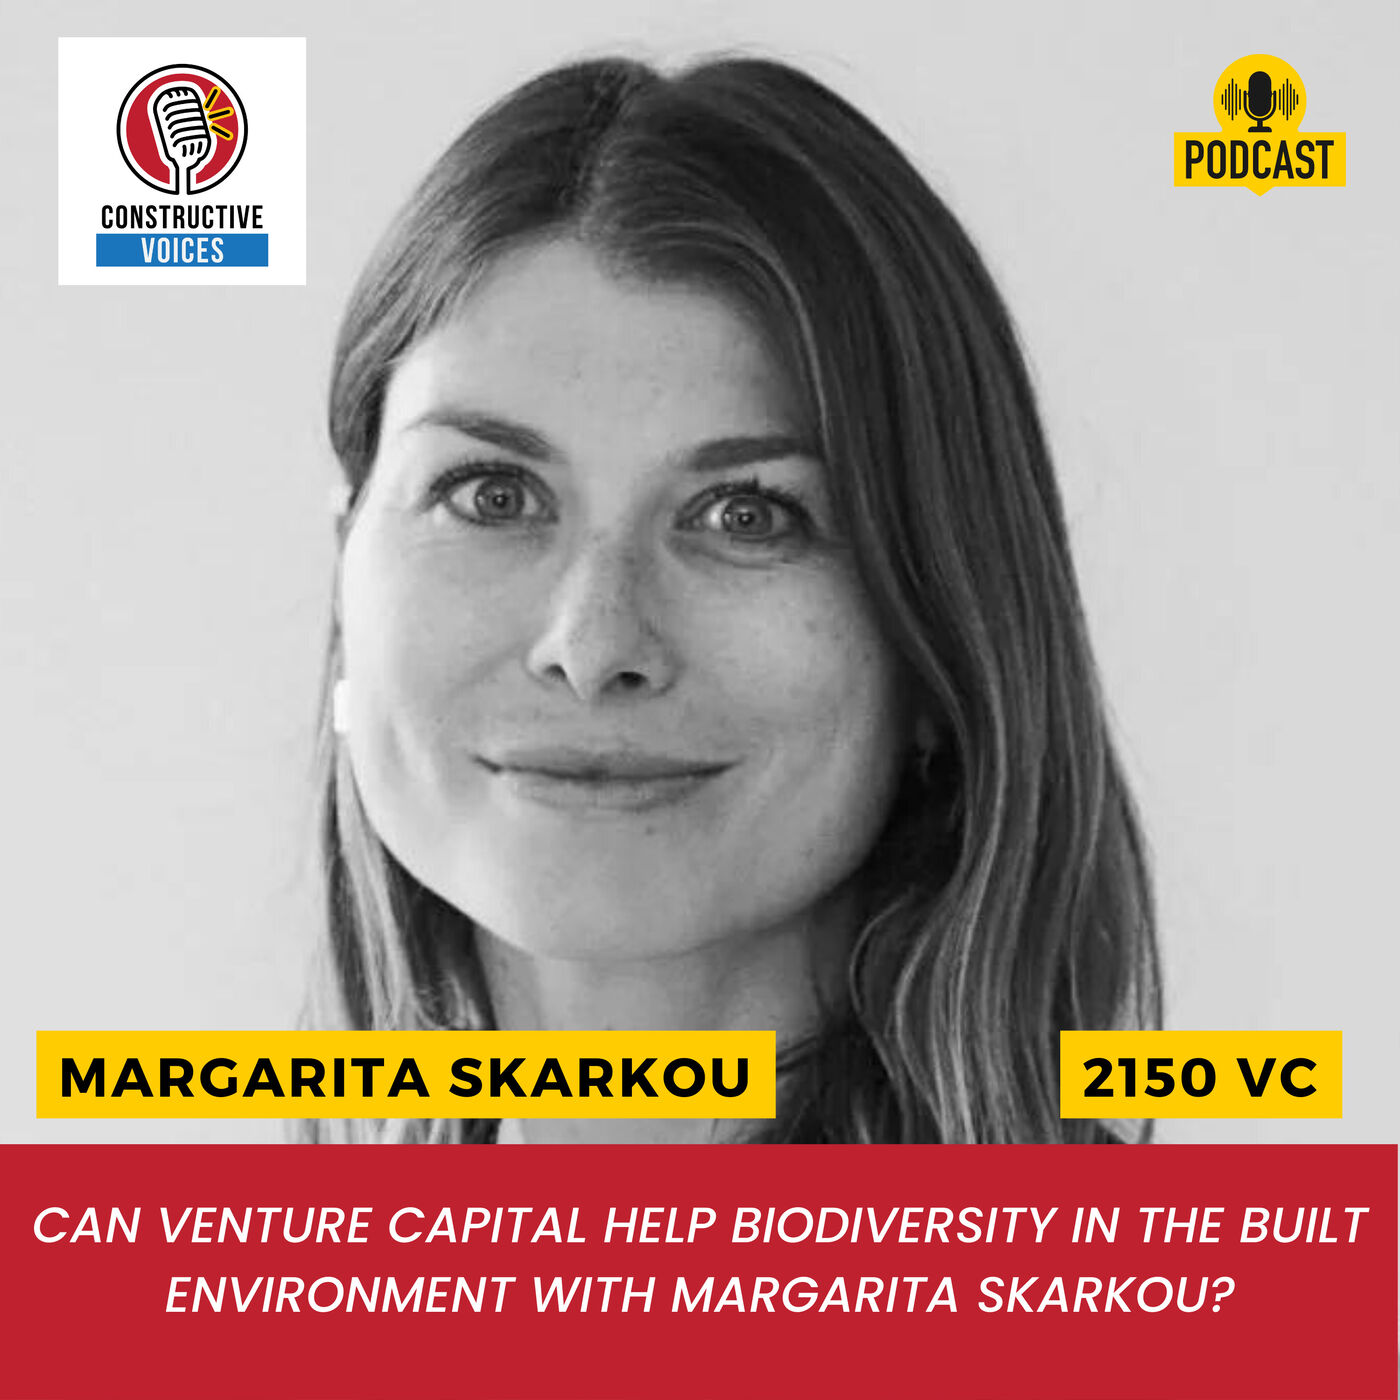 Can Venture Capital Help Biodiversity in the Built Environment with Margarita Skarkou?